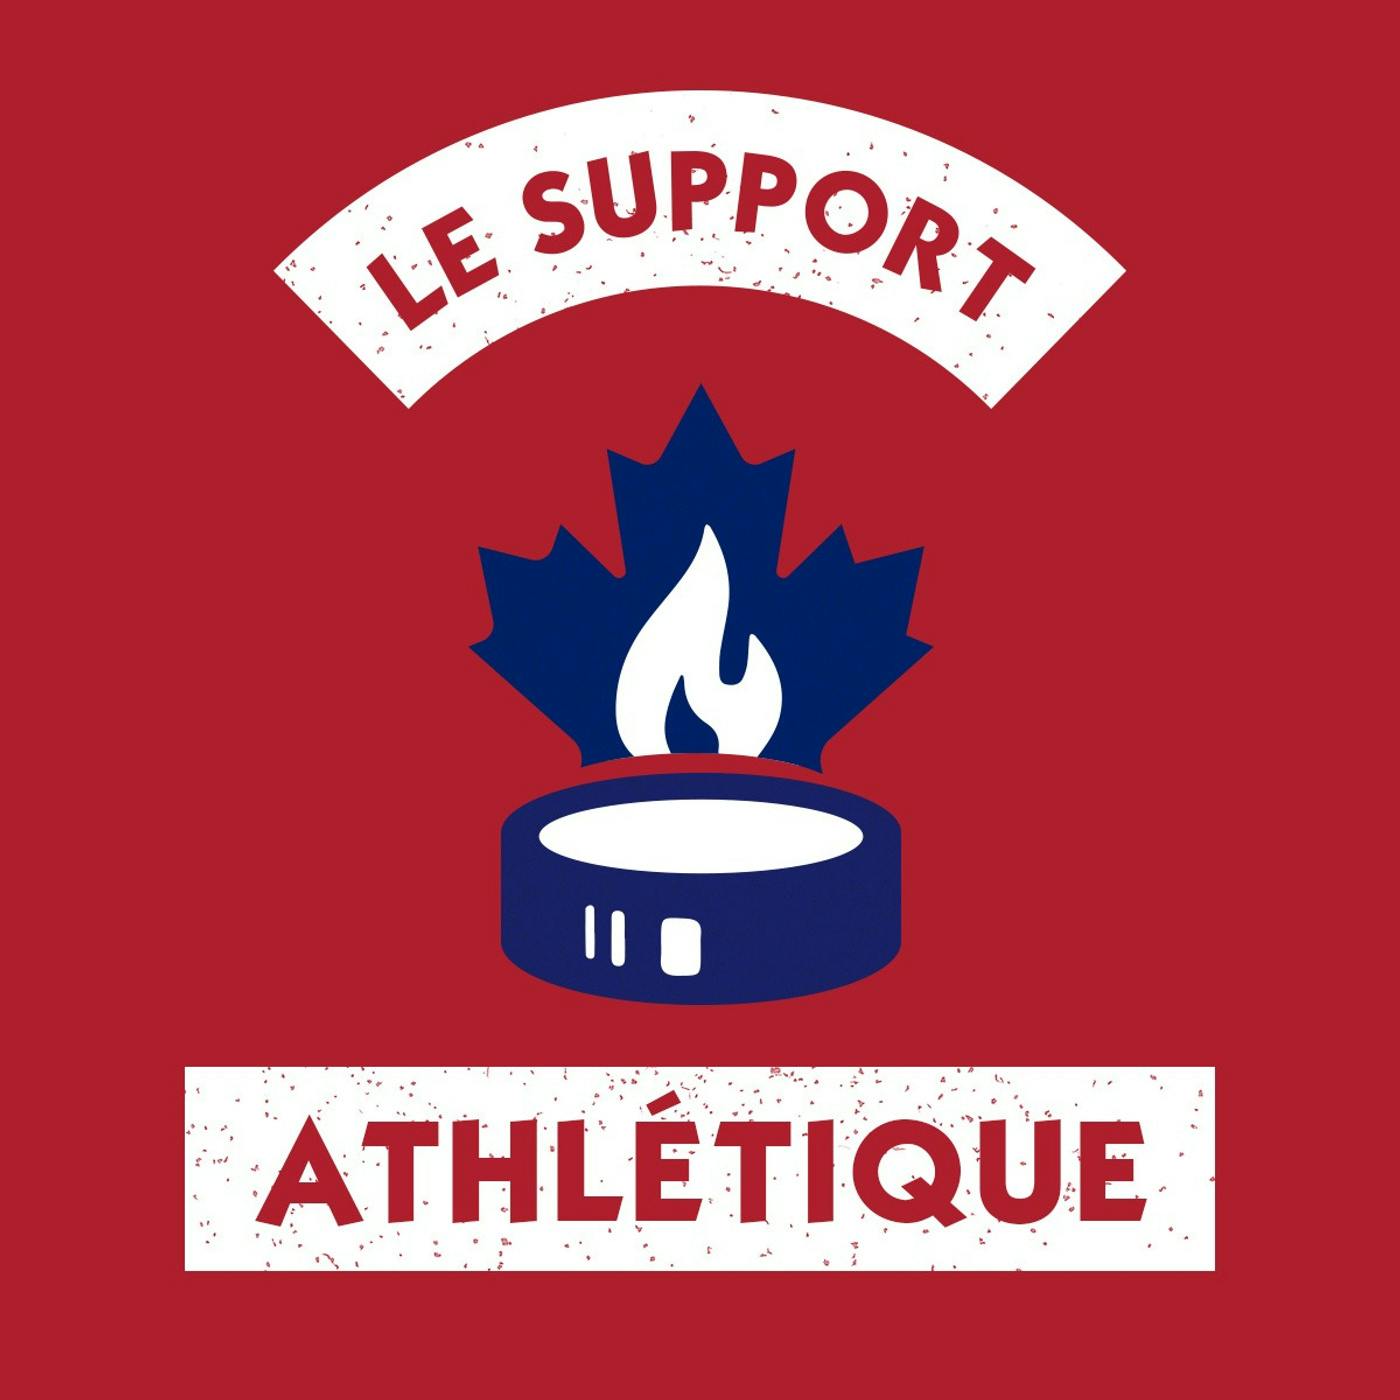 Le Support Athlétique: A show about the Montreal Canadiens